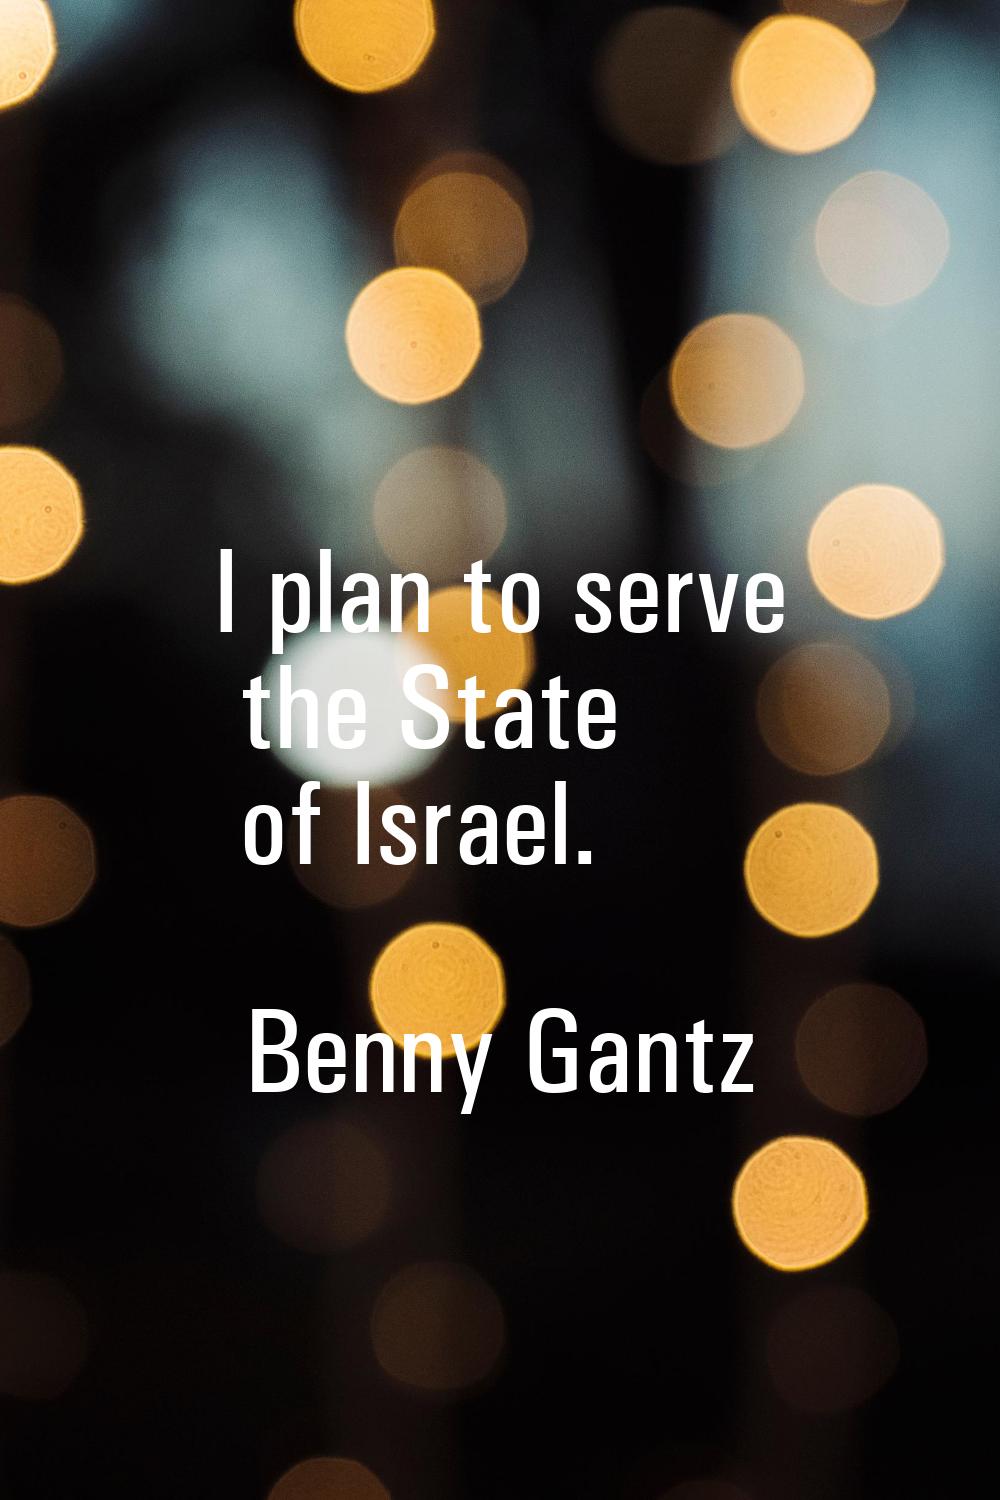 I plan to serve the State of Israel.